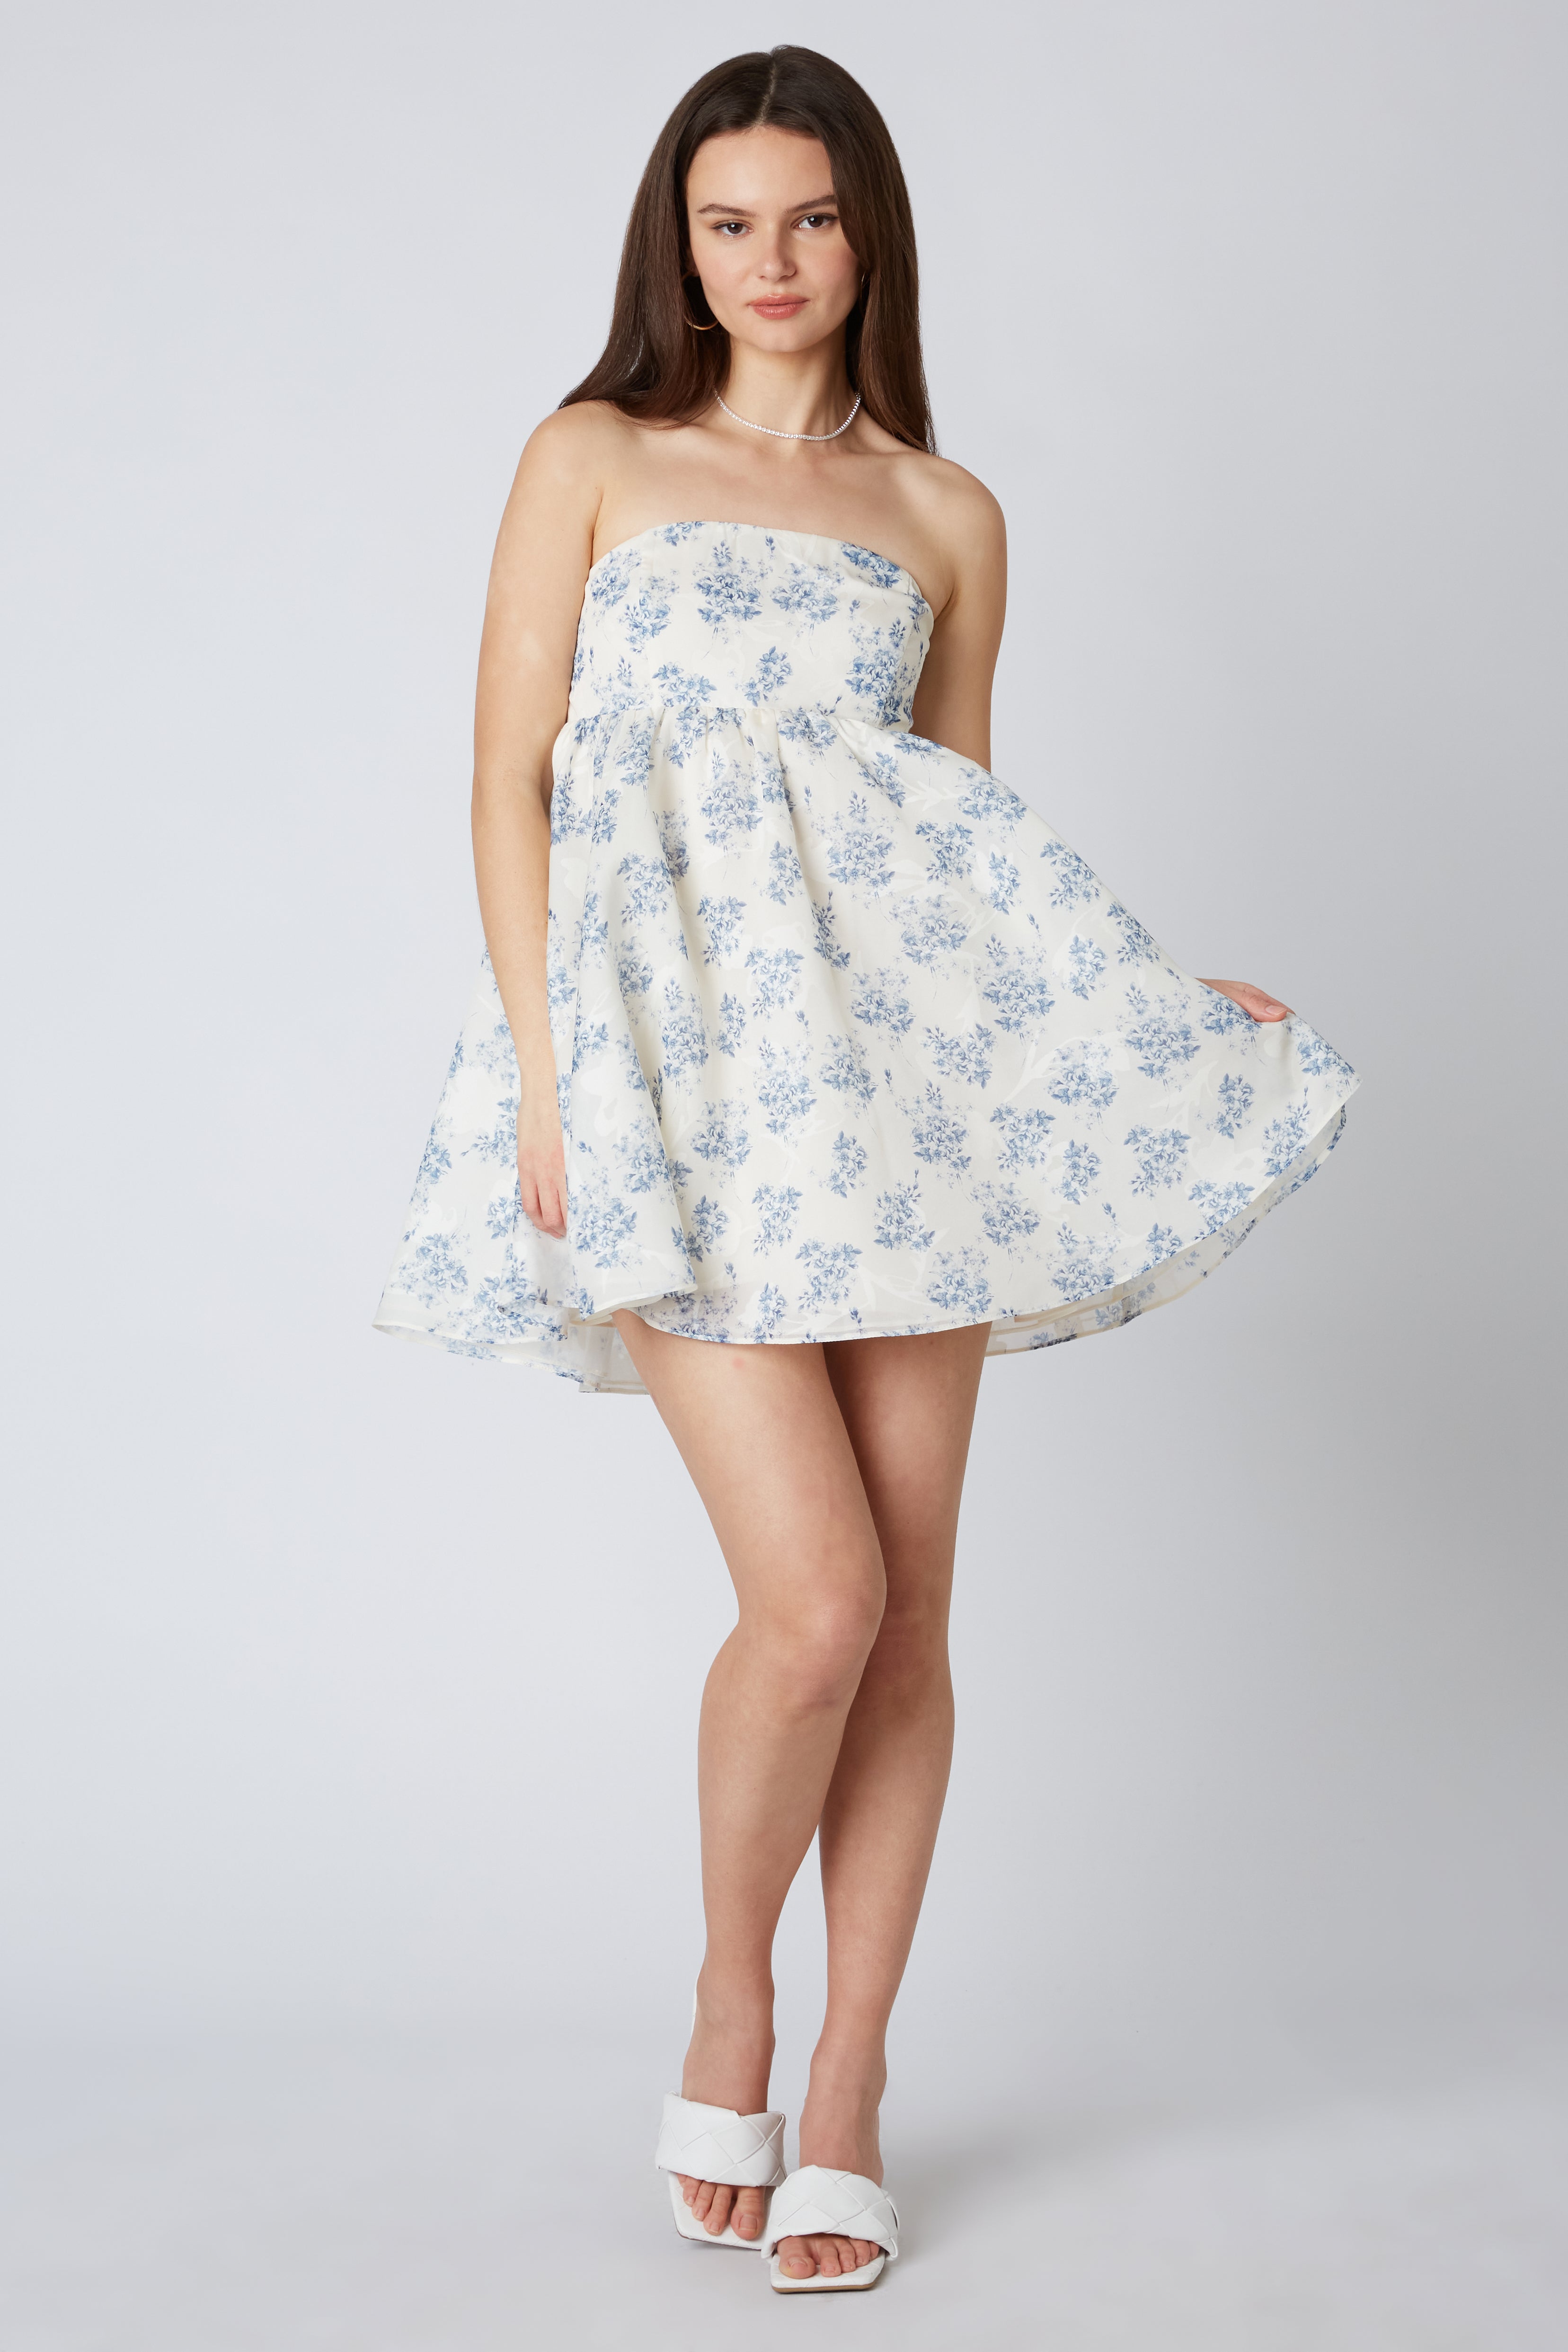 Organza Floral Mini Dress in Blue Front